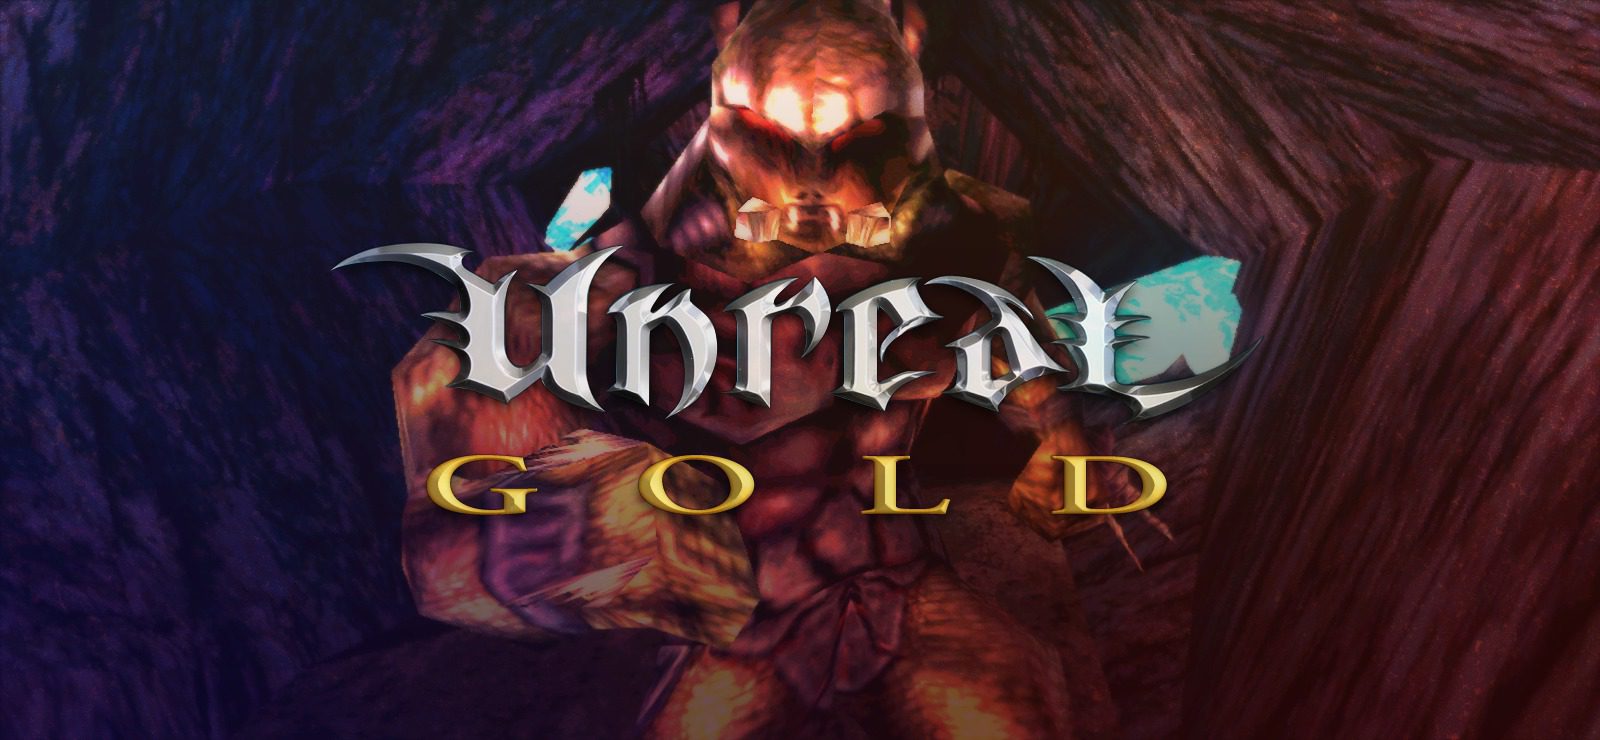 Unreal Gold is free on Steam and GOG